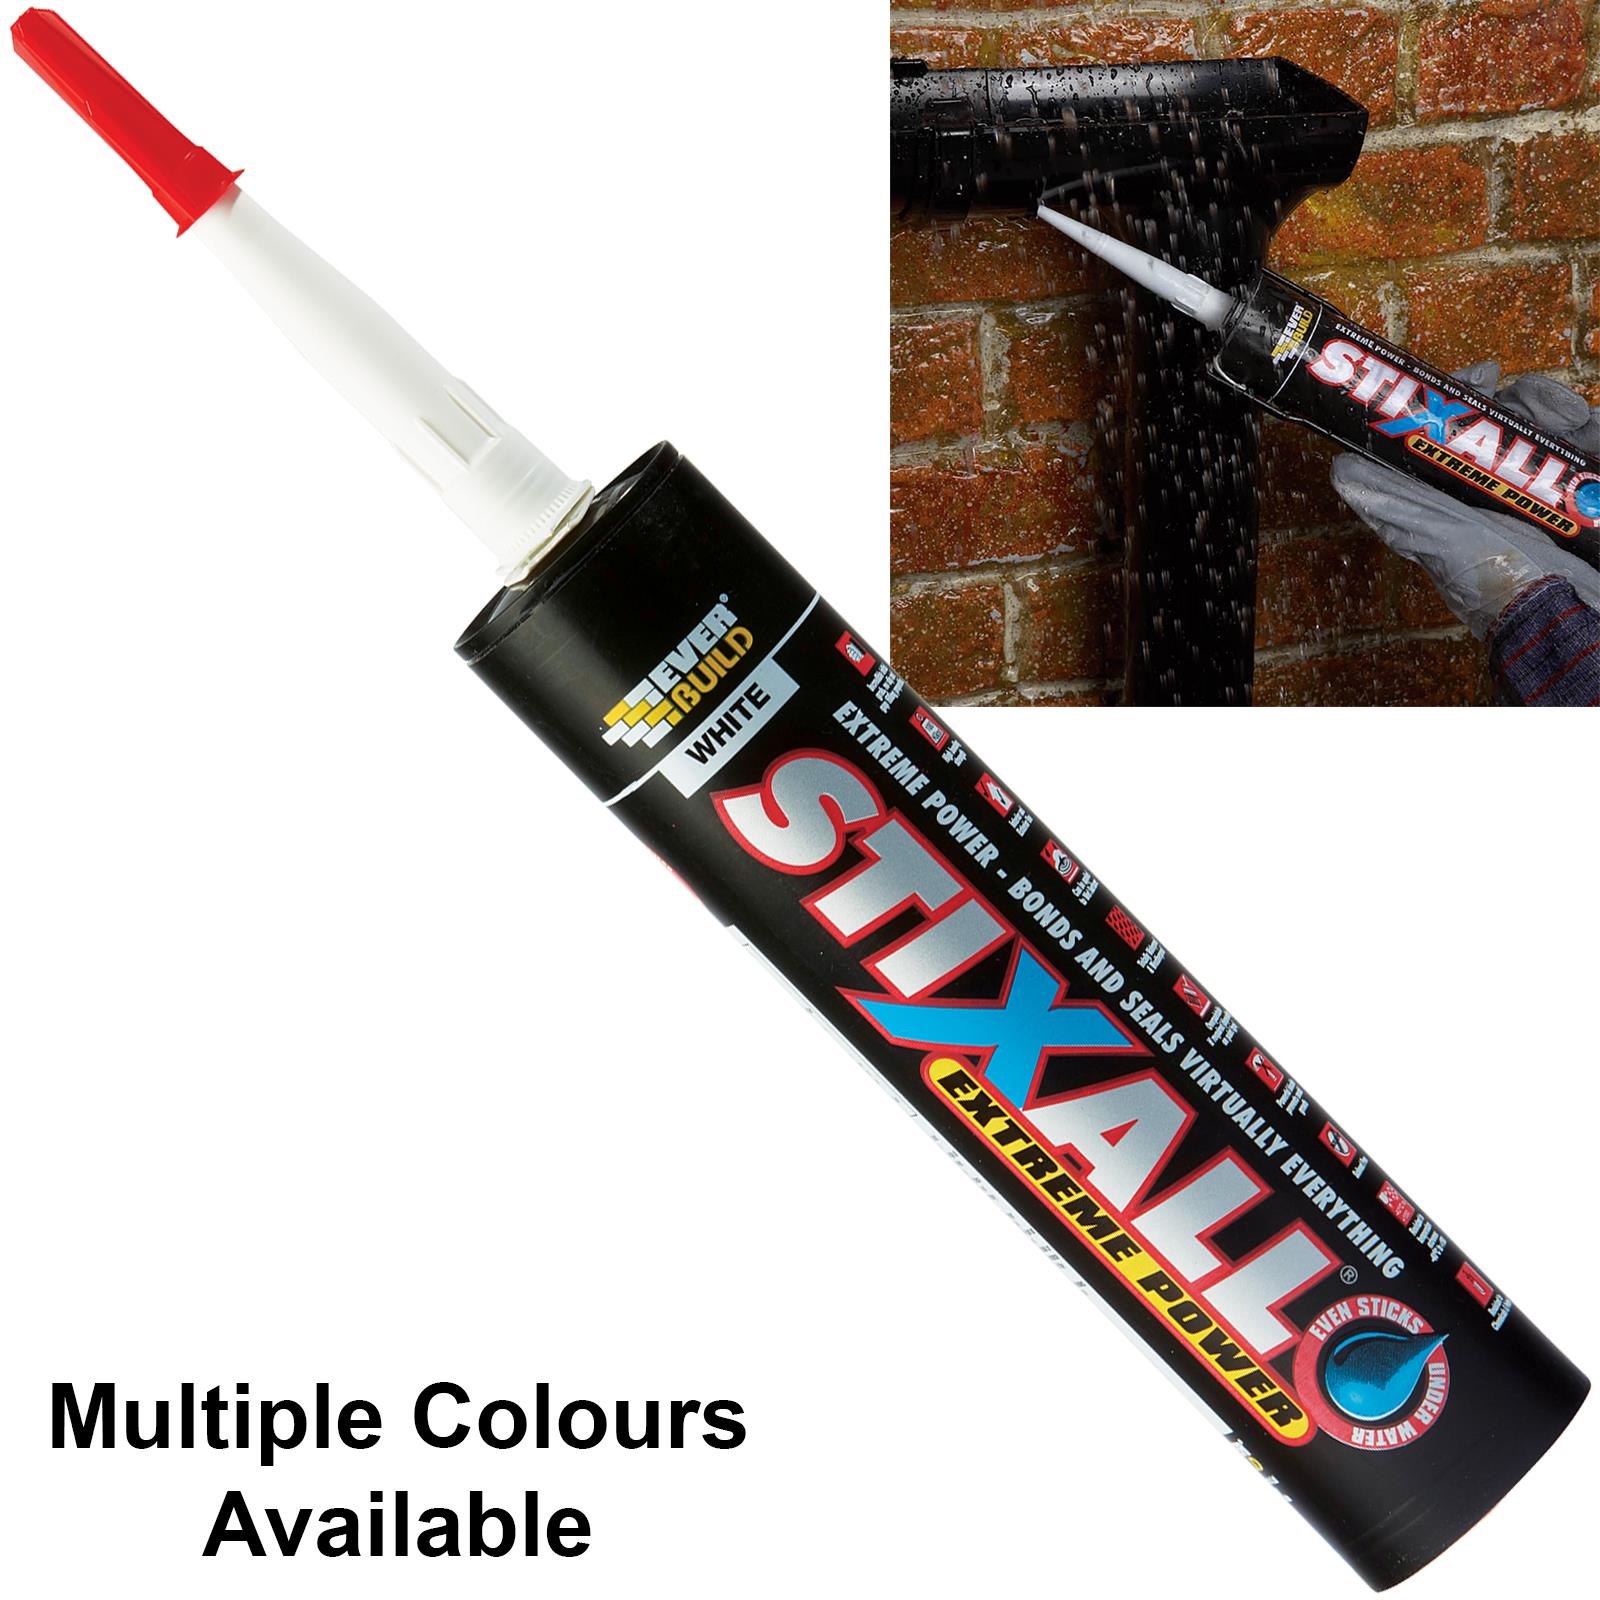 EverBuild Stixall Extreme Power Adhesive Sealant 290ml High Bonding Quick Curing